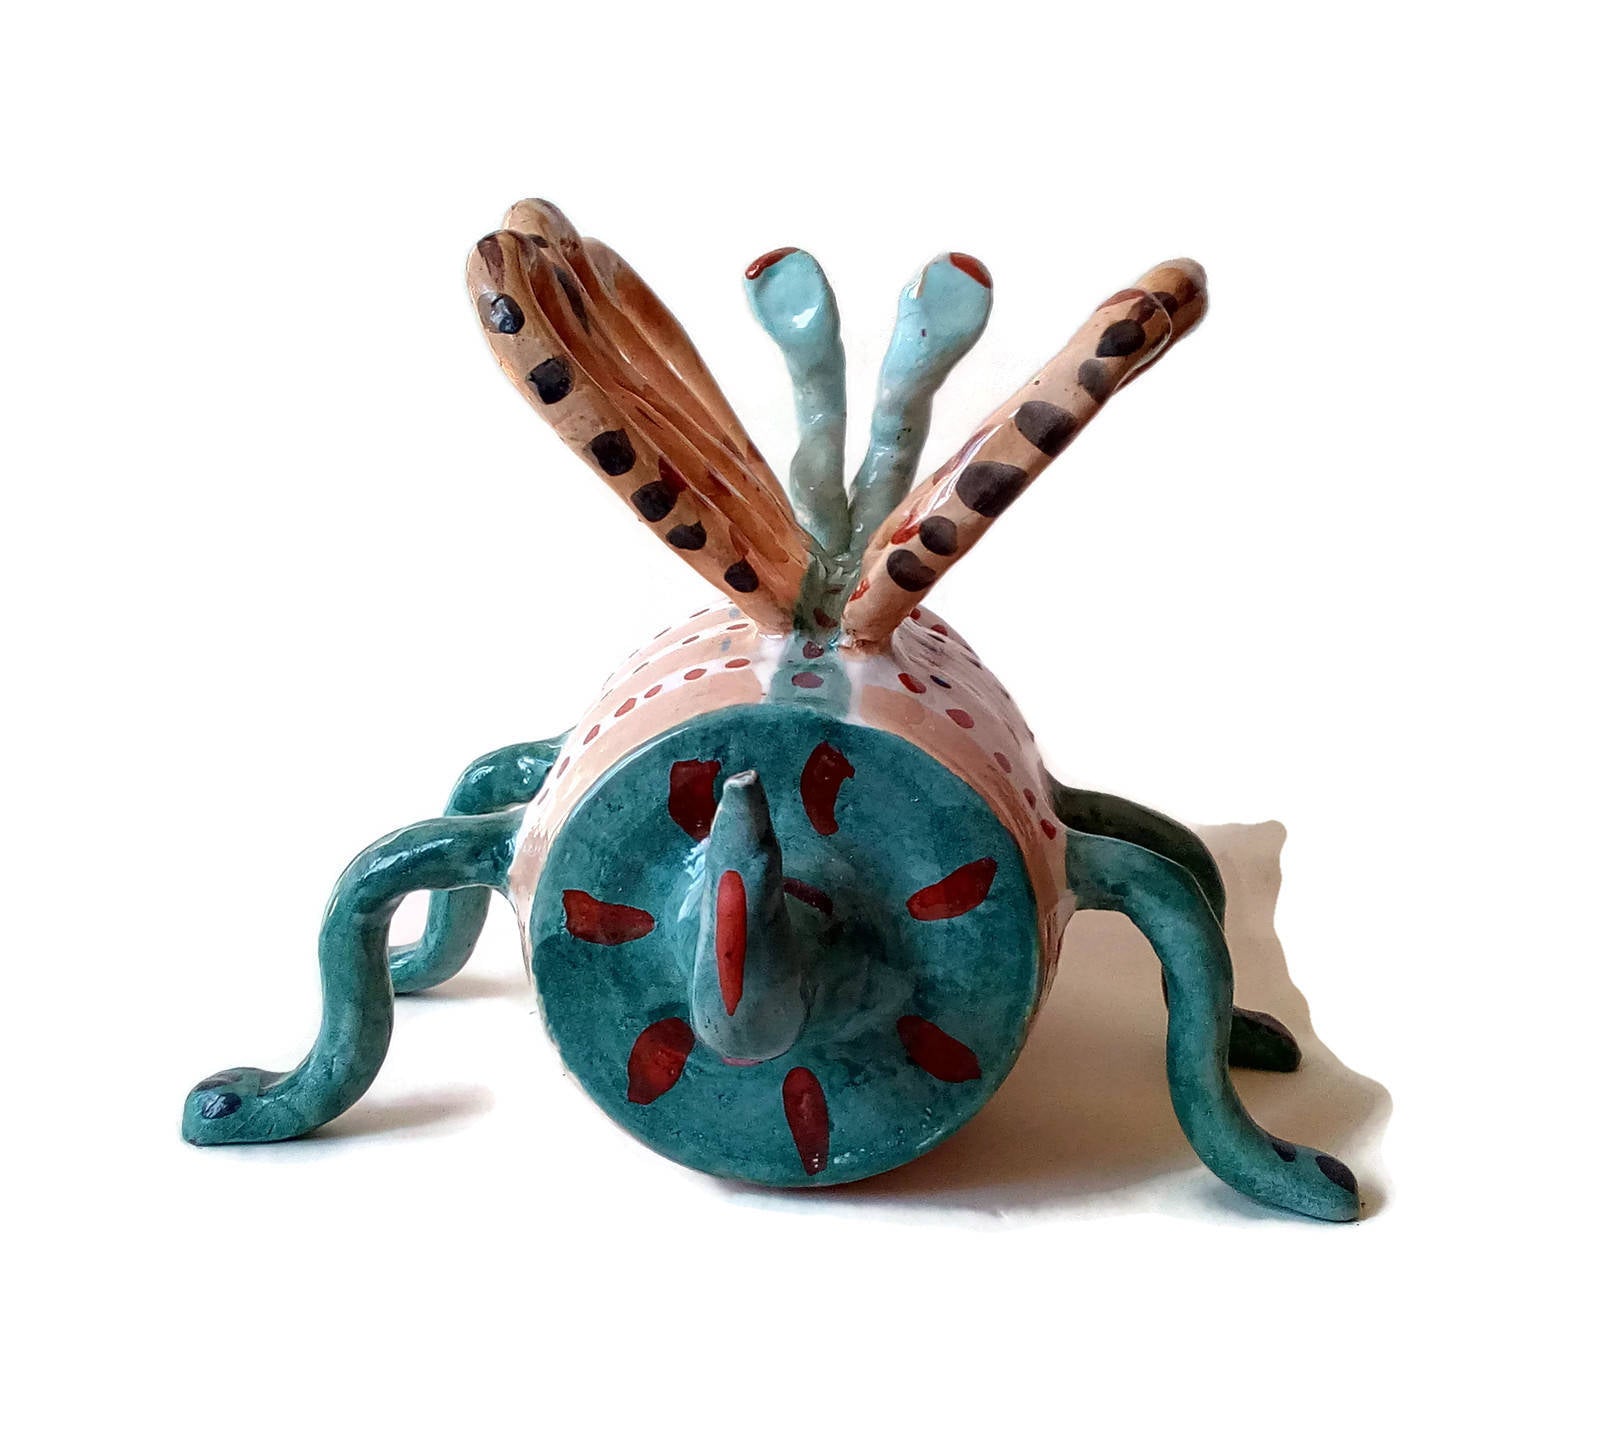 Handmade Ceramic Sculpture Weird Creature, Colorful Hand Painted Abstract Animal Figure, Clay Office Desk Accessories Best Gifts For Him - Ceramica Ana Rafael